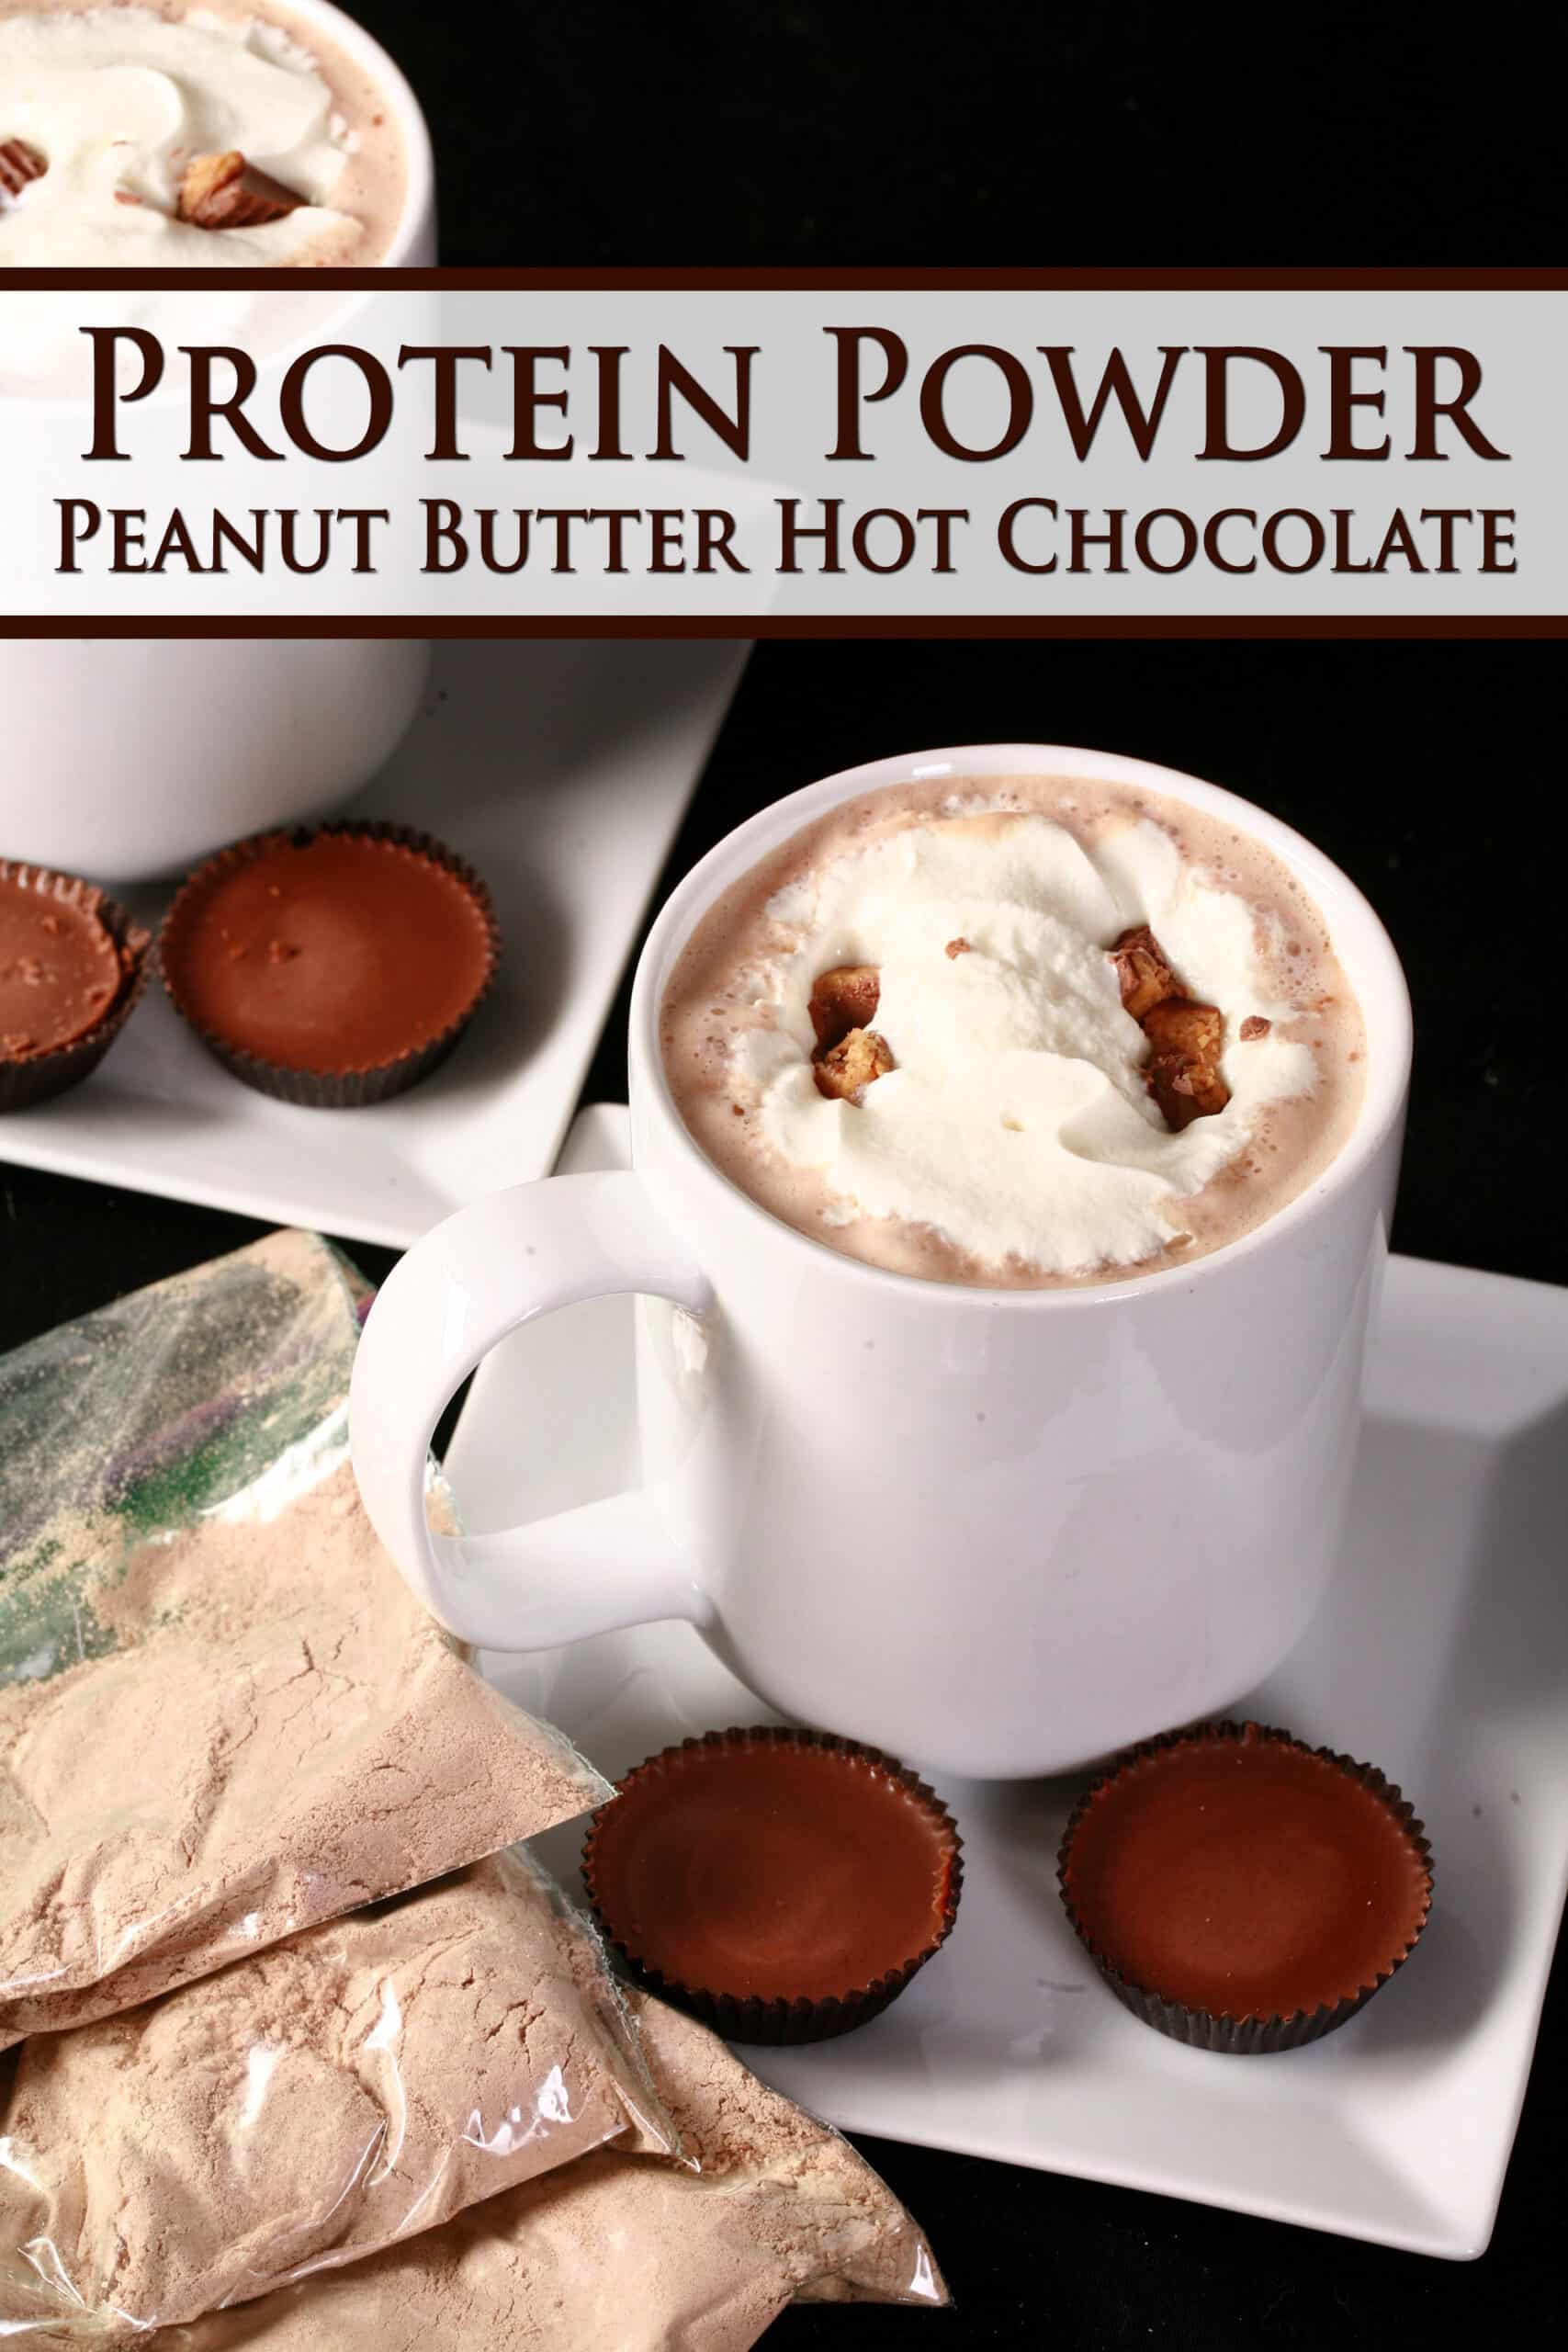 2 mugs of protein peanut butter cup hot chocolate with whipped cream and chopped peanut butter cups. Overlaid text says protein powder peanut butter hot chocolate.